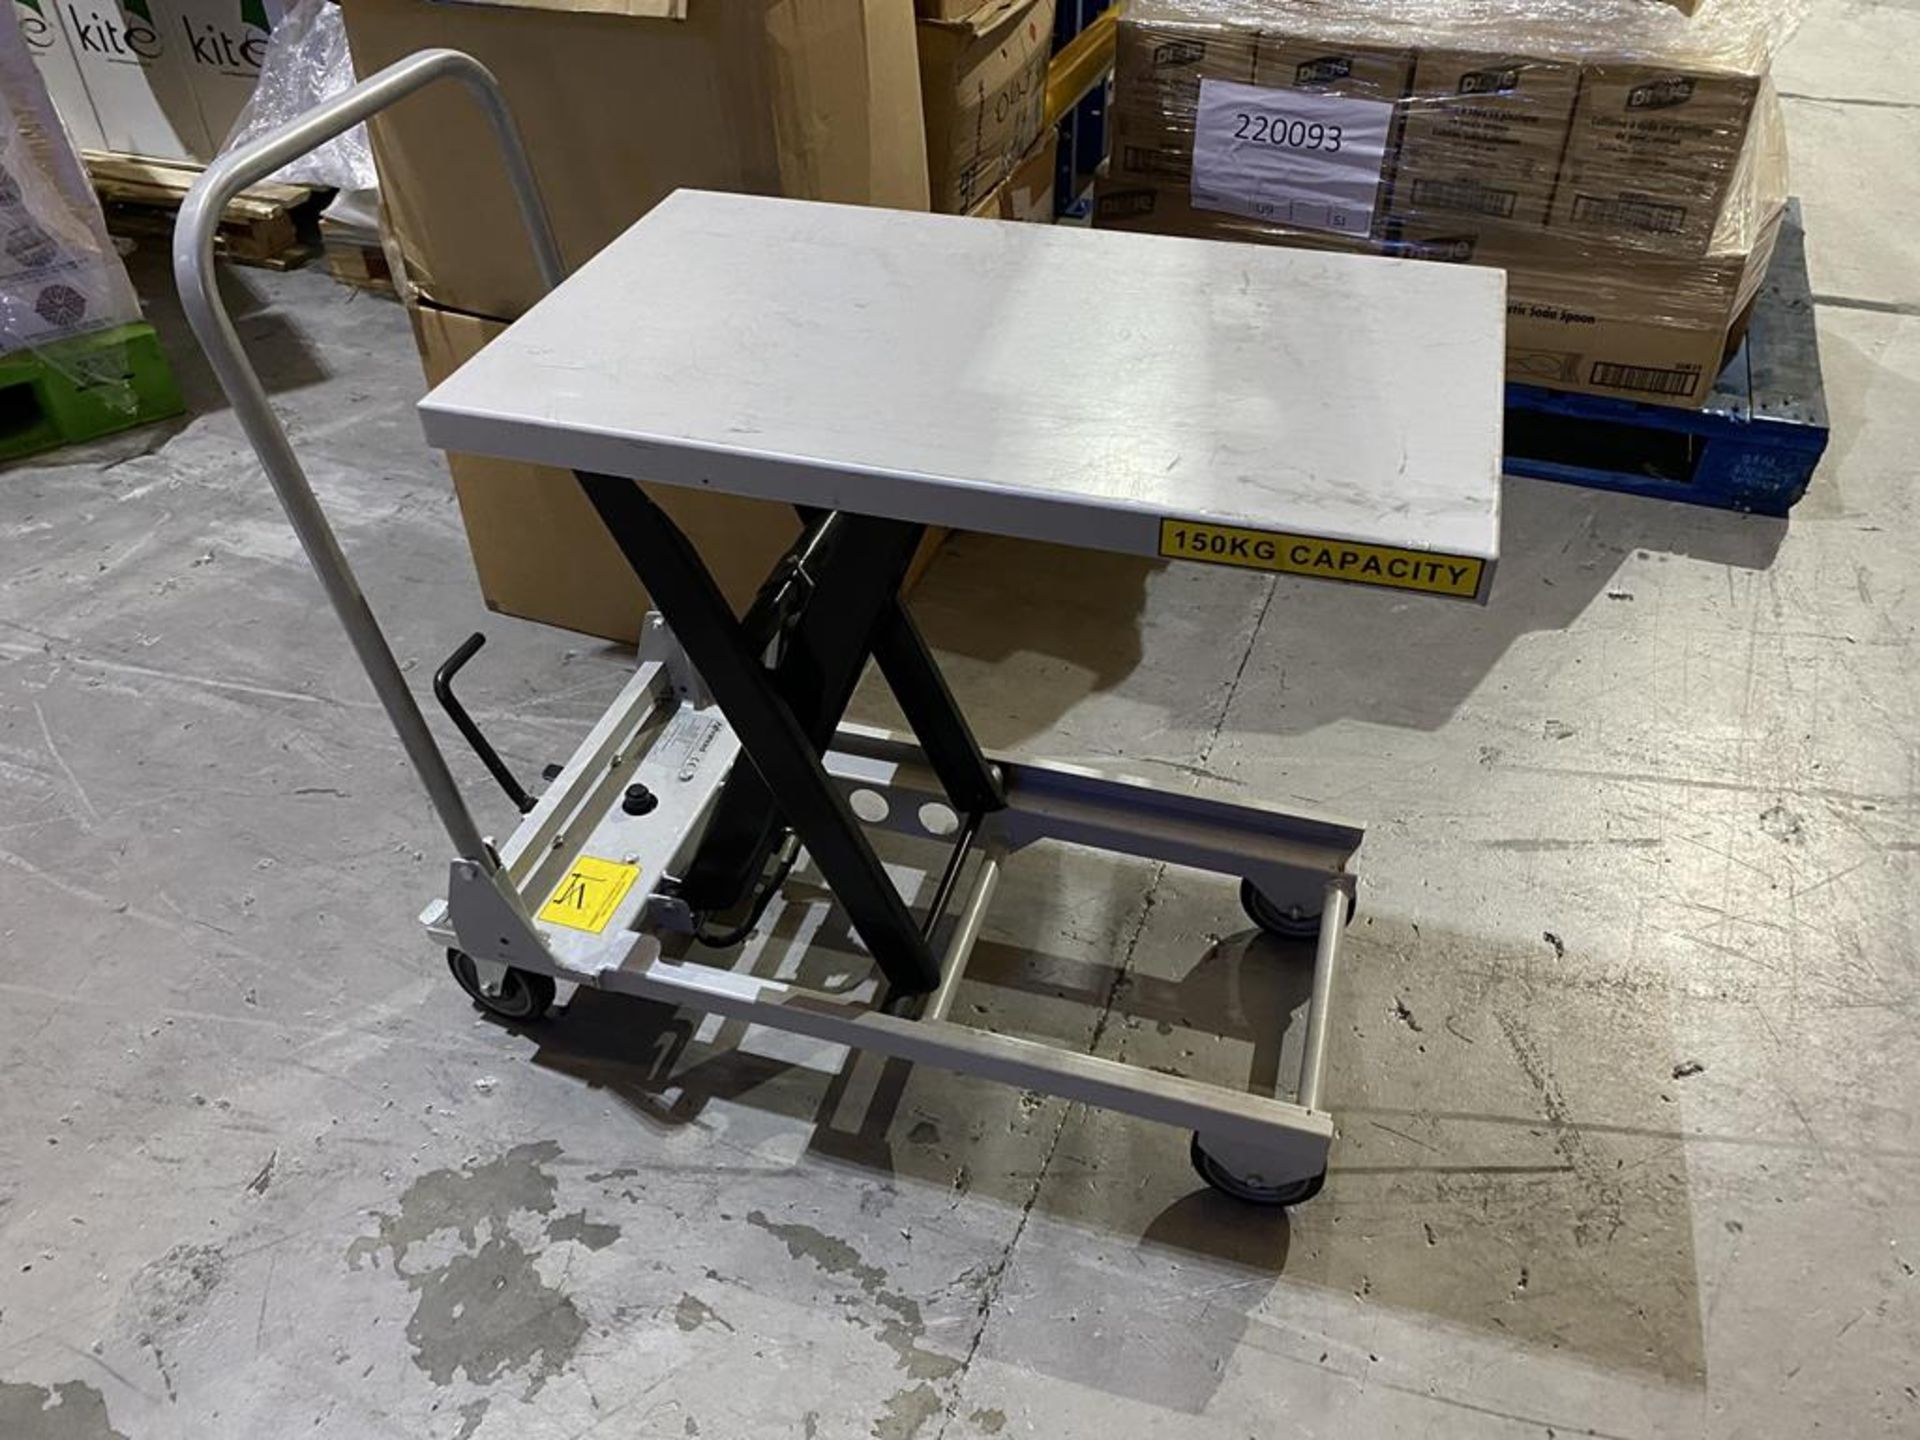 Advanced 150kg Capacity Treadle Operated Lifting Trolley - Image 2 of 4